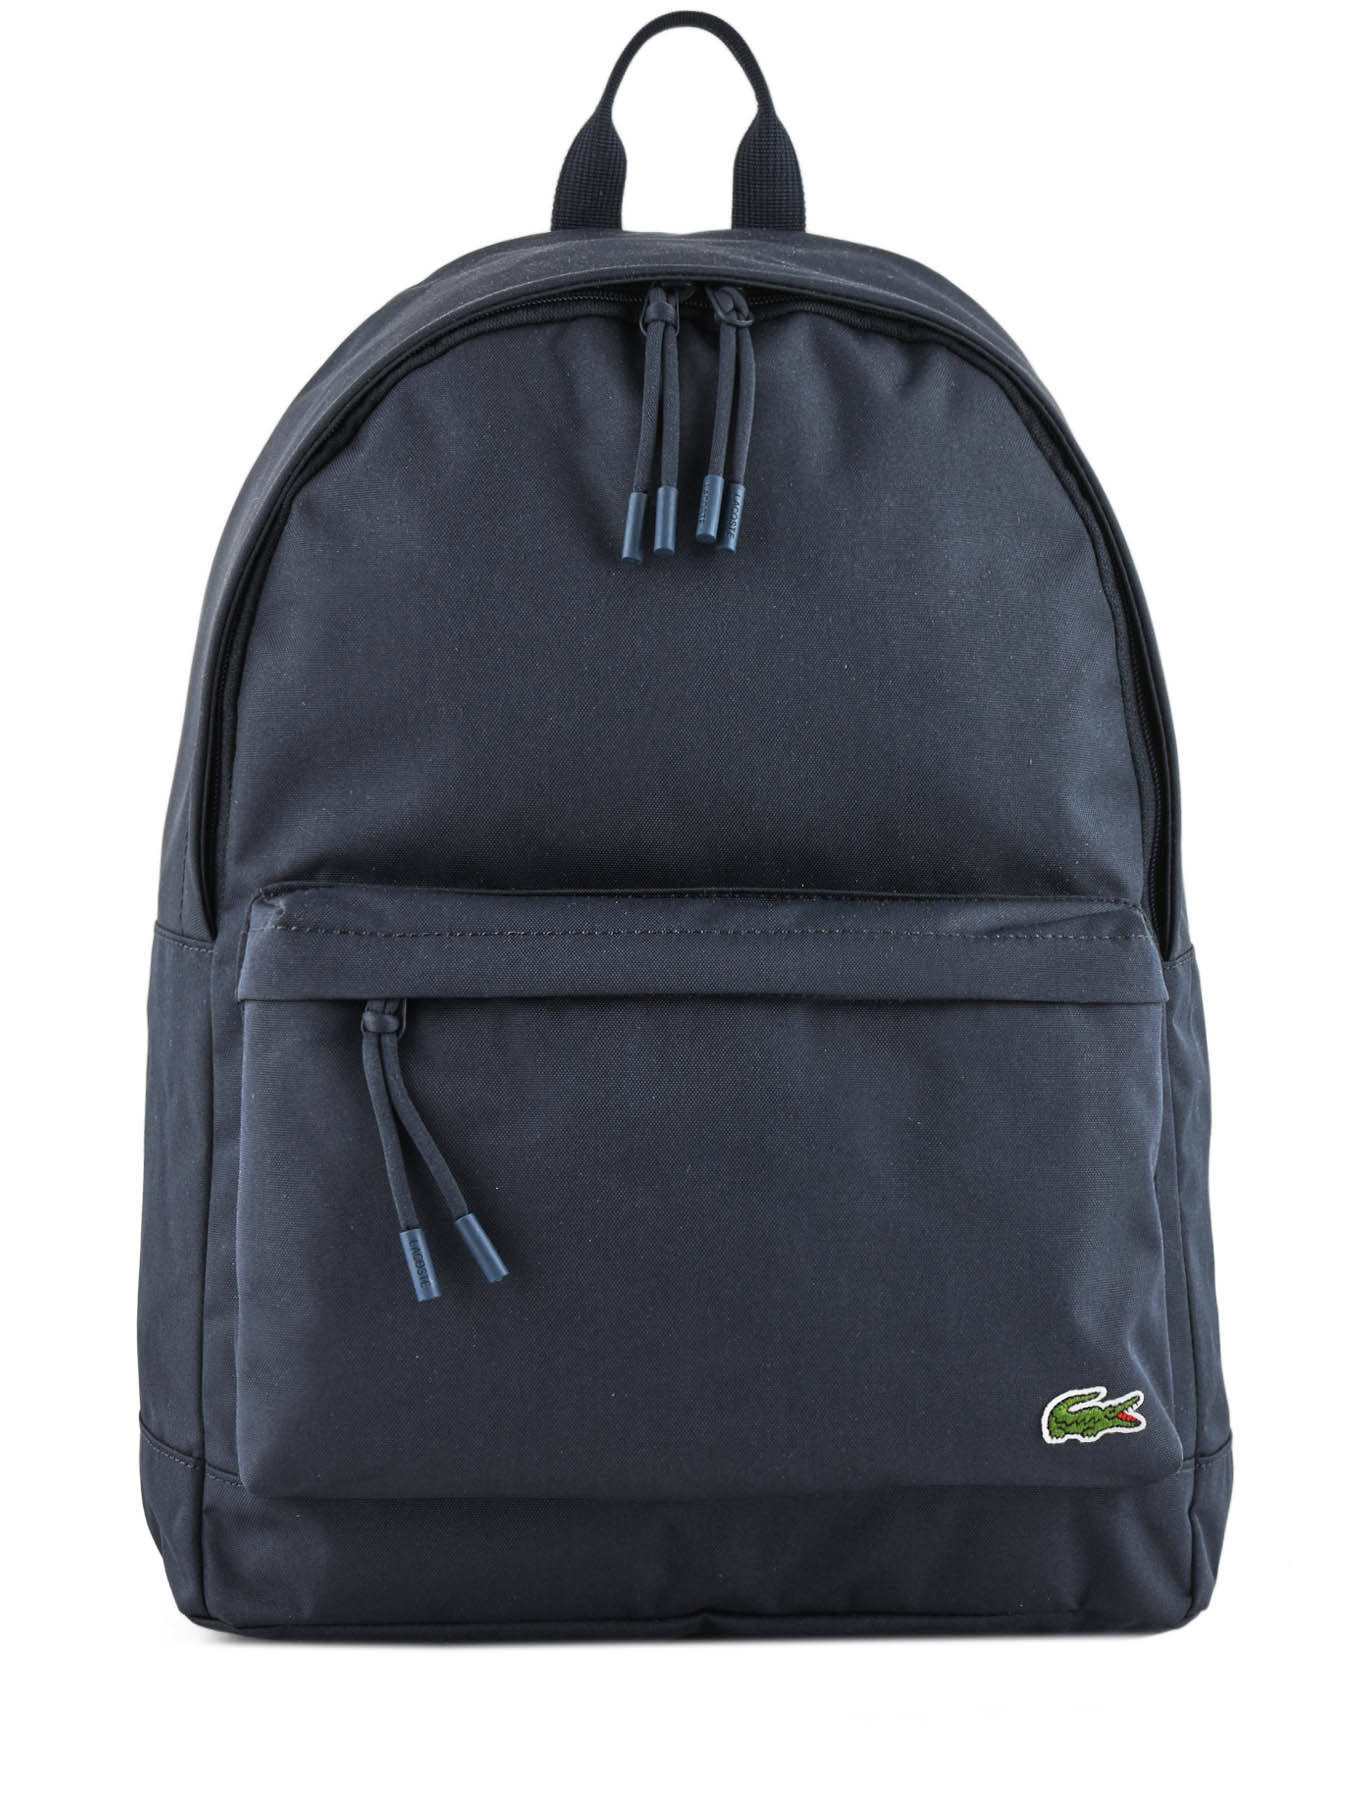 Lacoste Bagpack NH.2677.NE - best prices